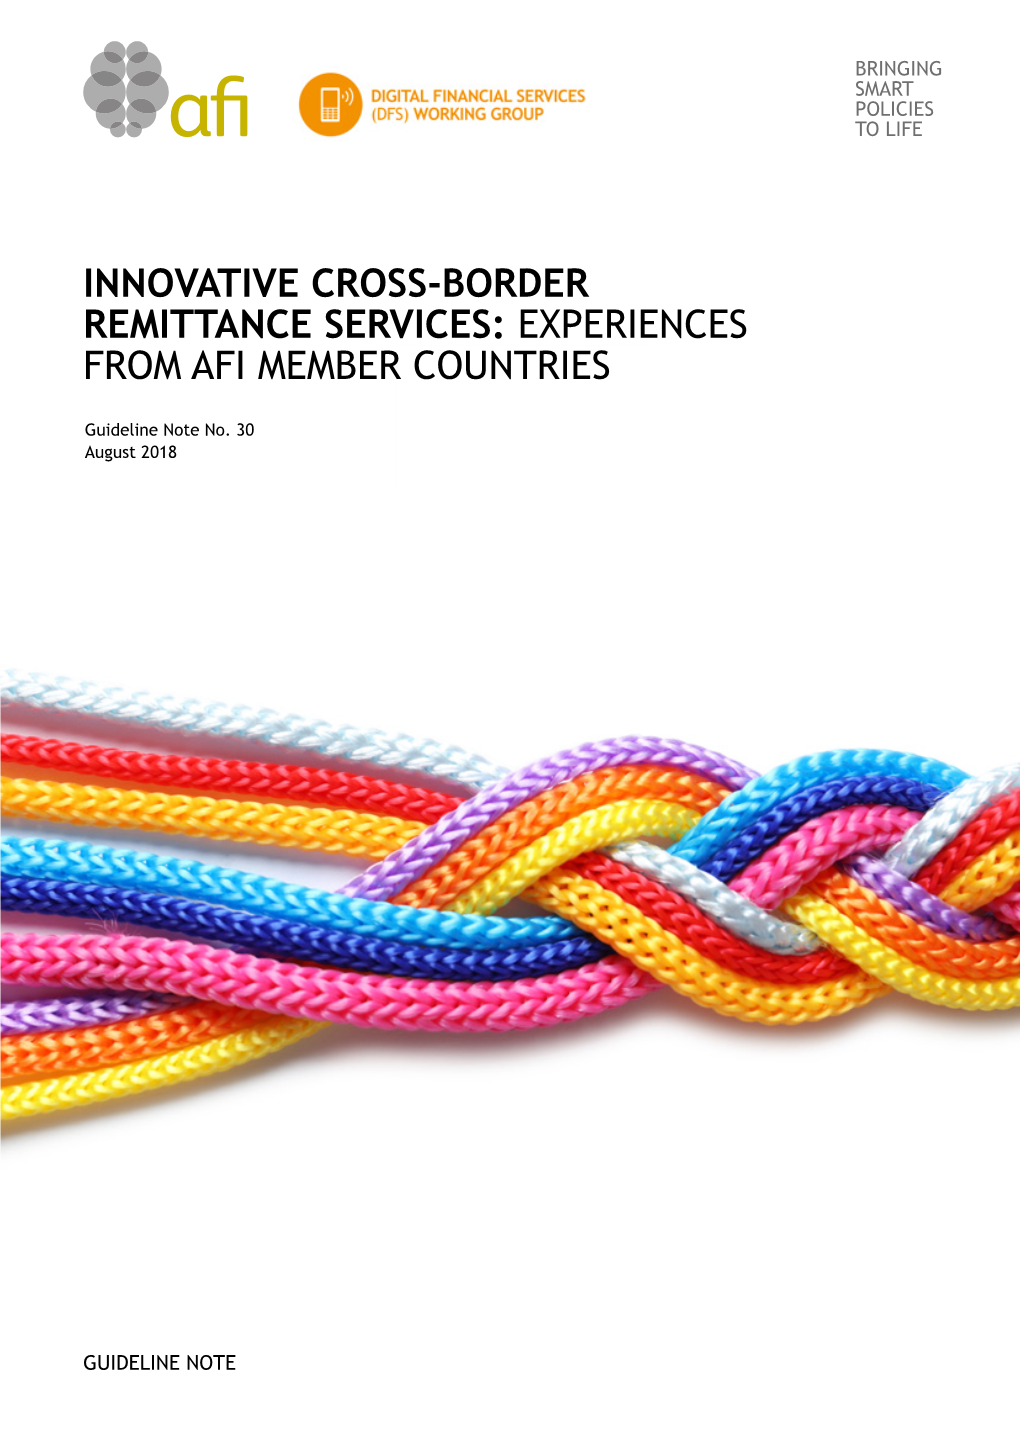 Innovative Cross-Border Remittance Services: Experiences from Afi Member Countries